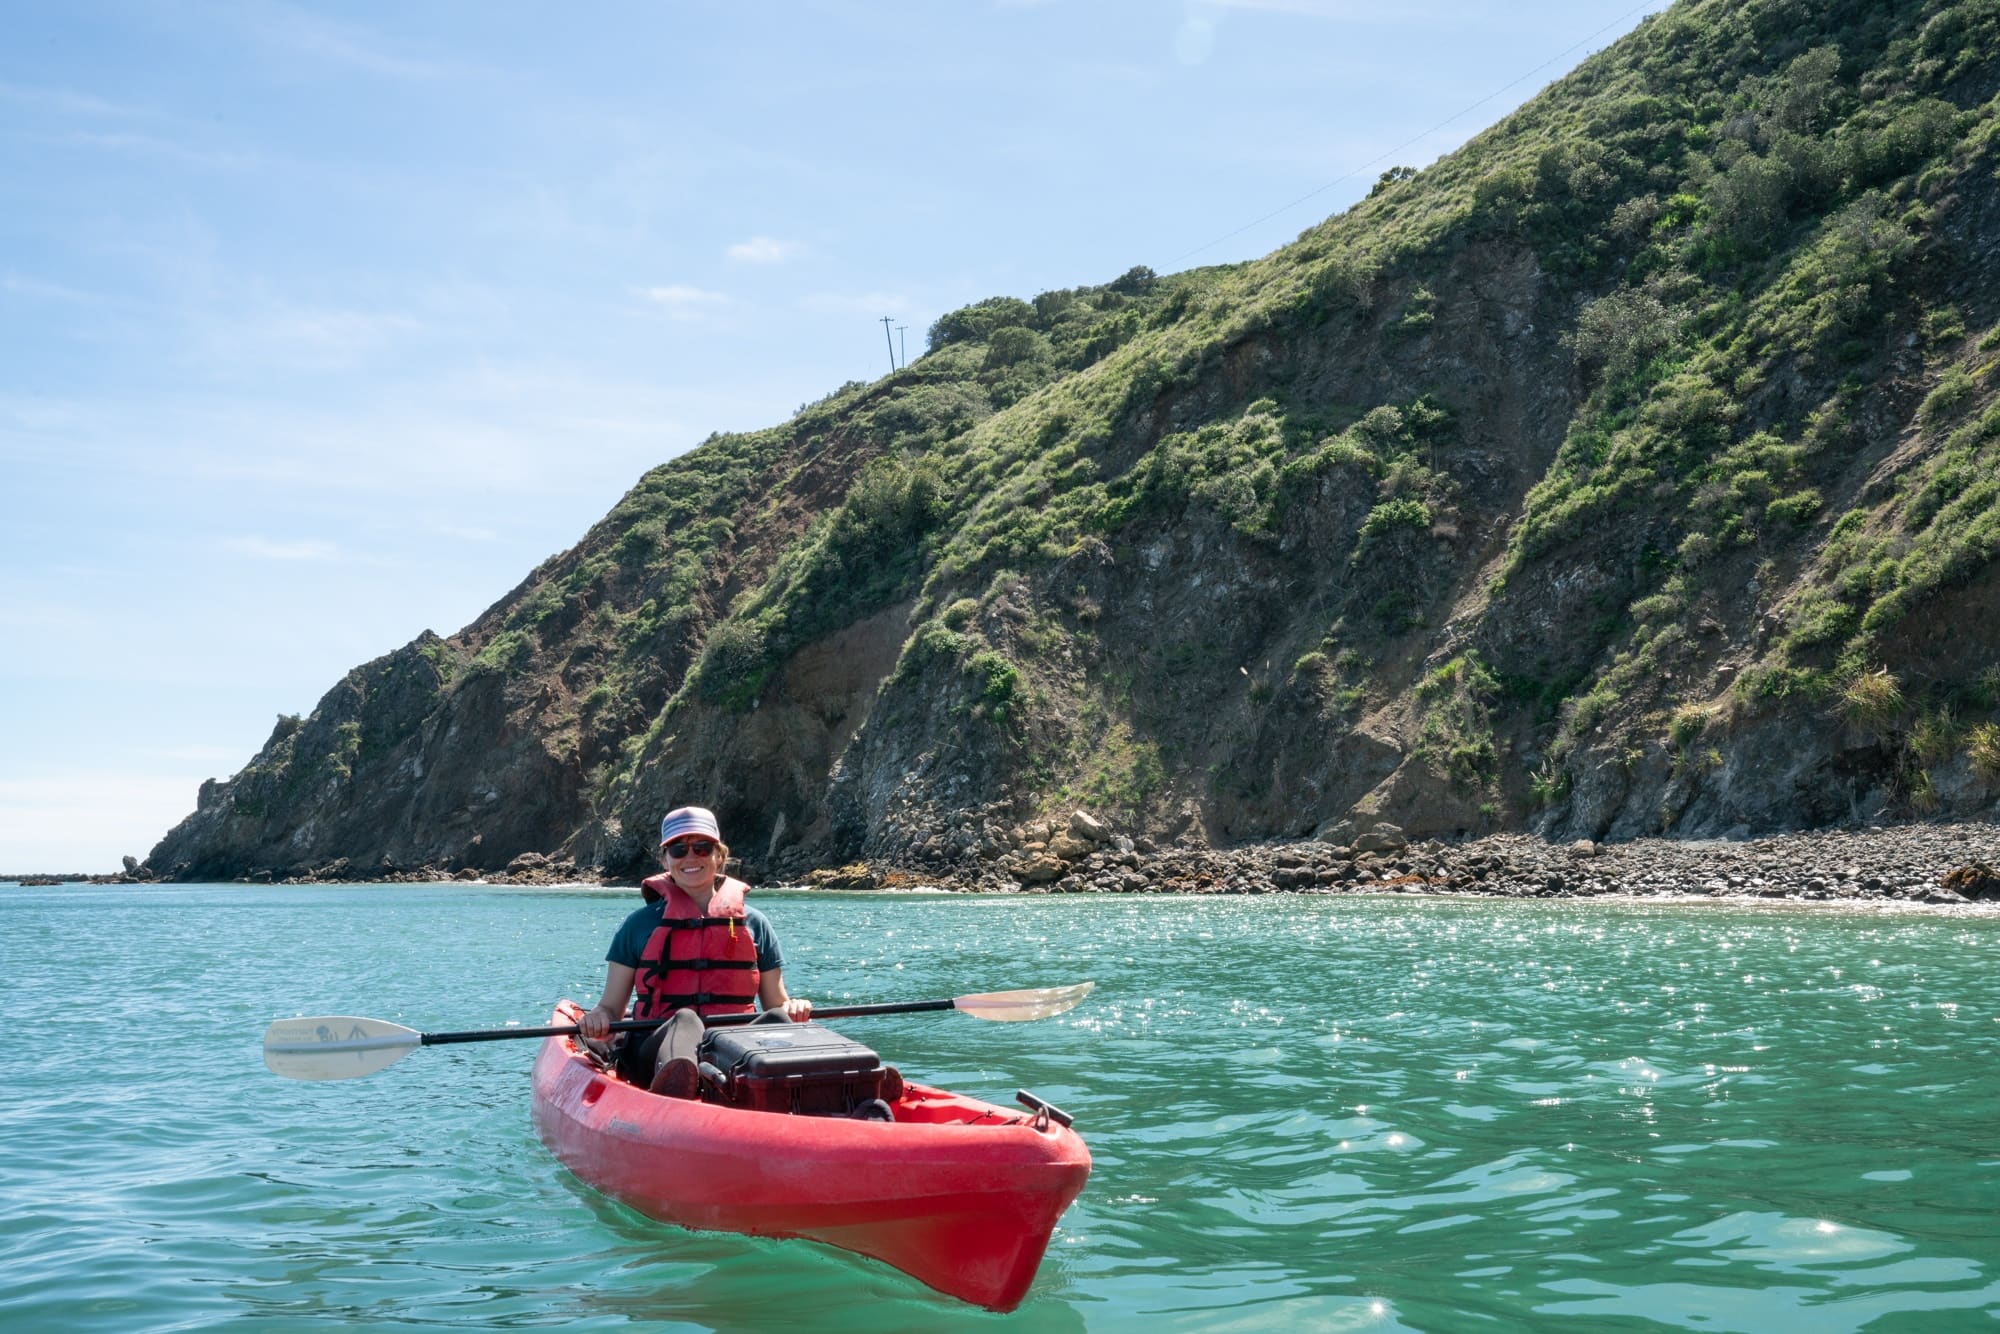 Avila Beach Kayaking // Plan a 6-day California coast road trip from Ventura to Cambria with this itinerary packed with outdoor adventure, amazing food, and unique places to stay.